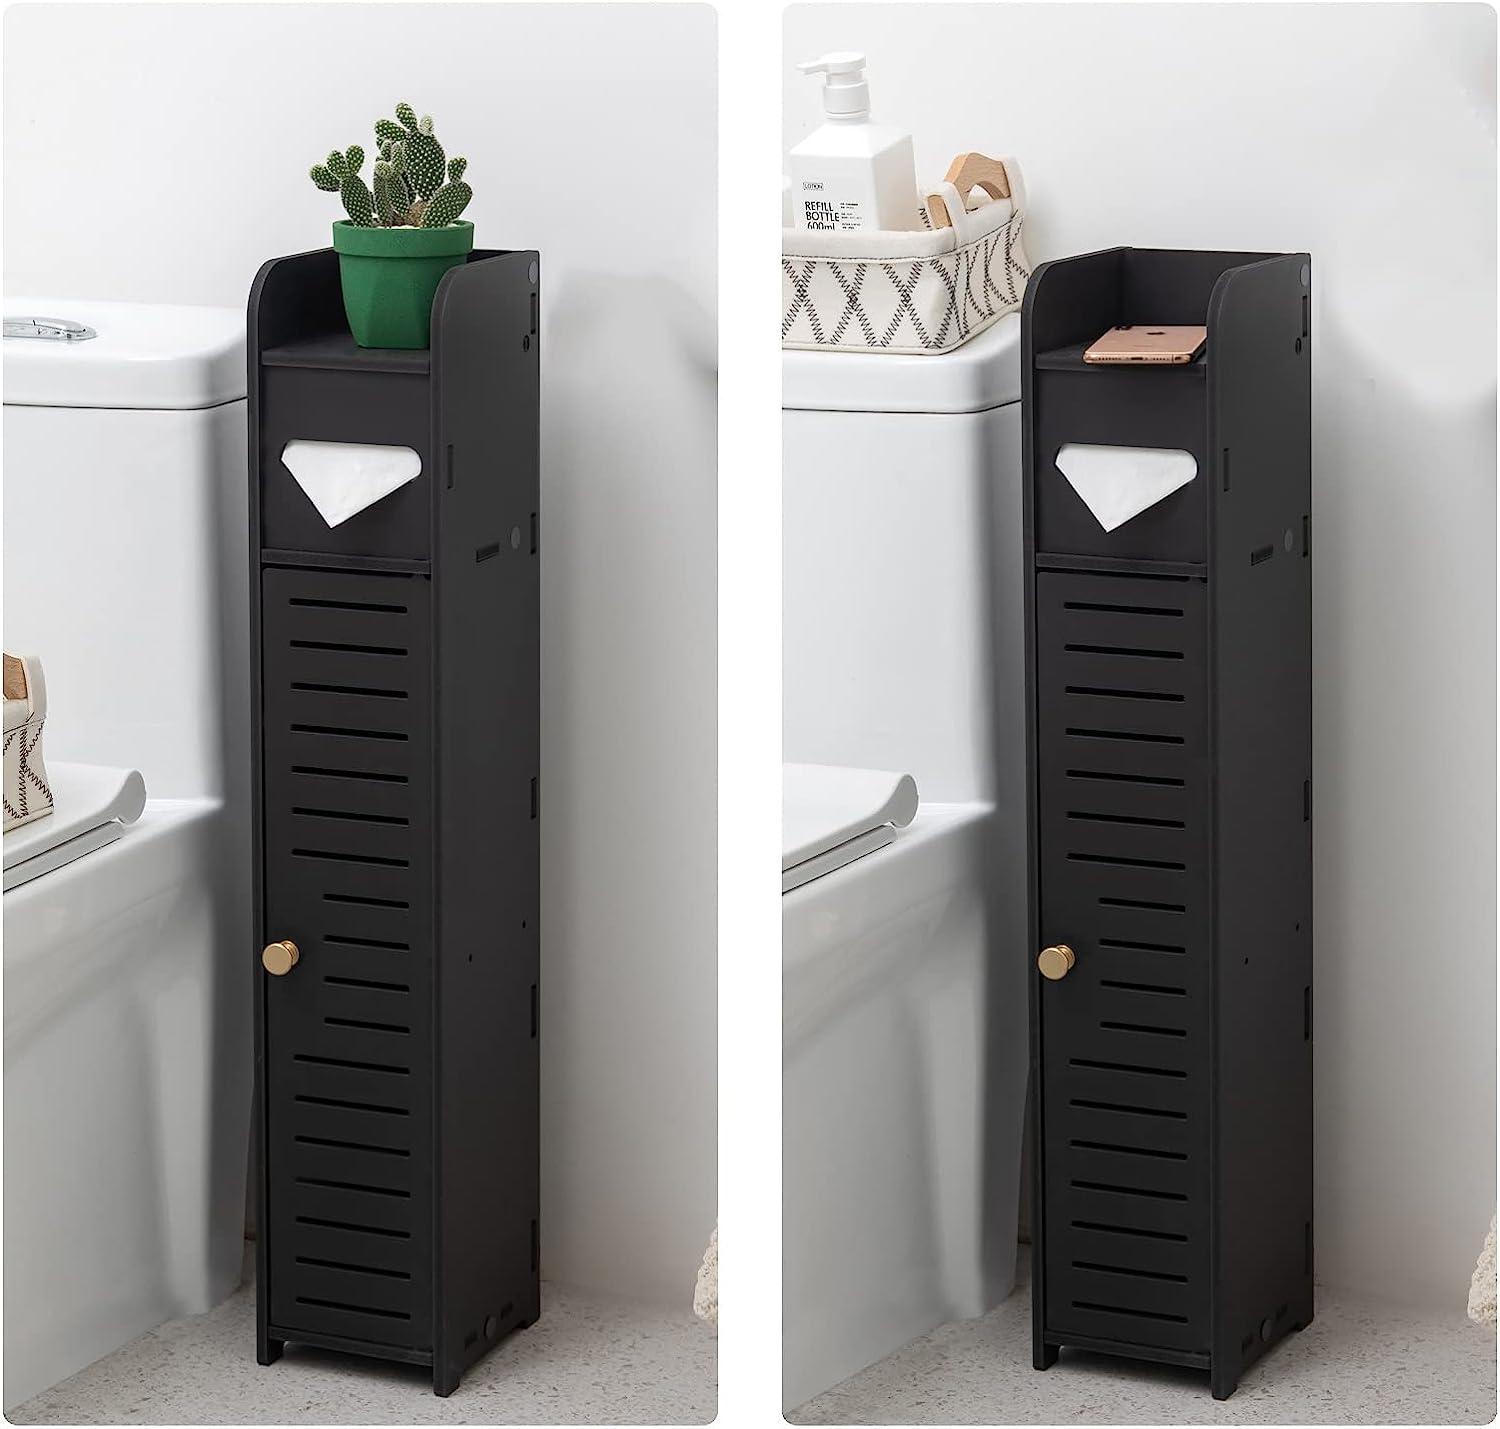 Small Bathroom Storage,Toilet Paper Stand Beside Toilet Storage Fit for  Half Bathroom,Toilet Paper Cabinet Next to Toilet Storage,Waterproof Bathroom  Storage Cabinet for Small Spaces,Black by AOJEZOR 31.5''H Black